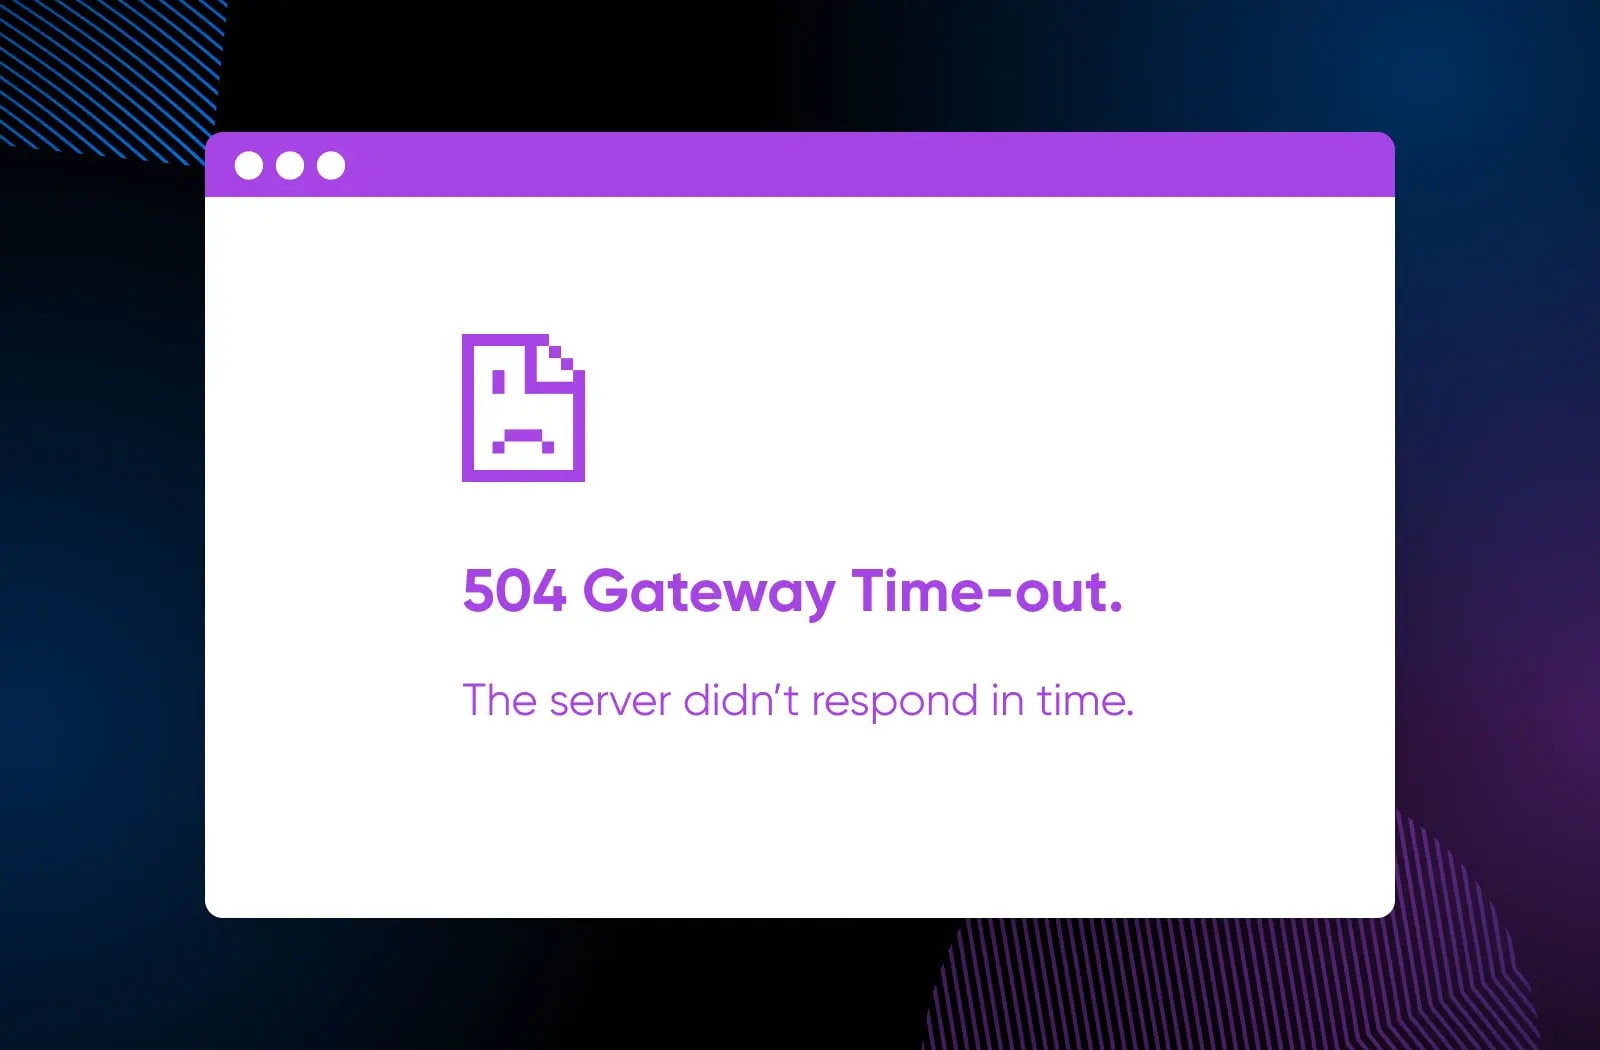 "504 Gateway Time-out." error message dialog box with the title, "The server didn't respond in time."